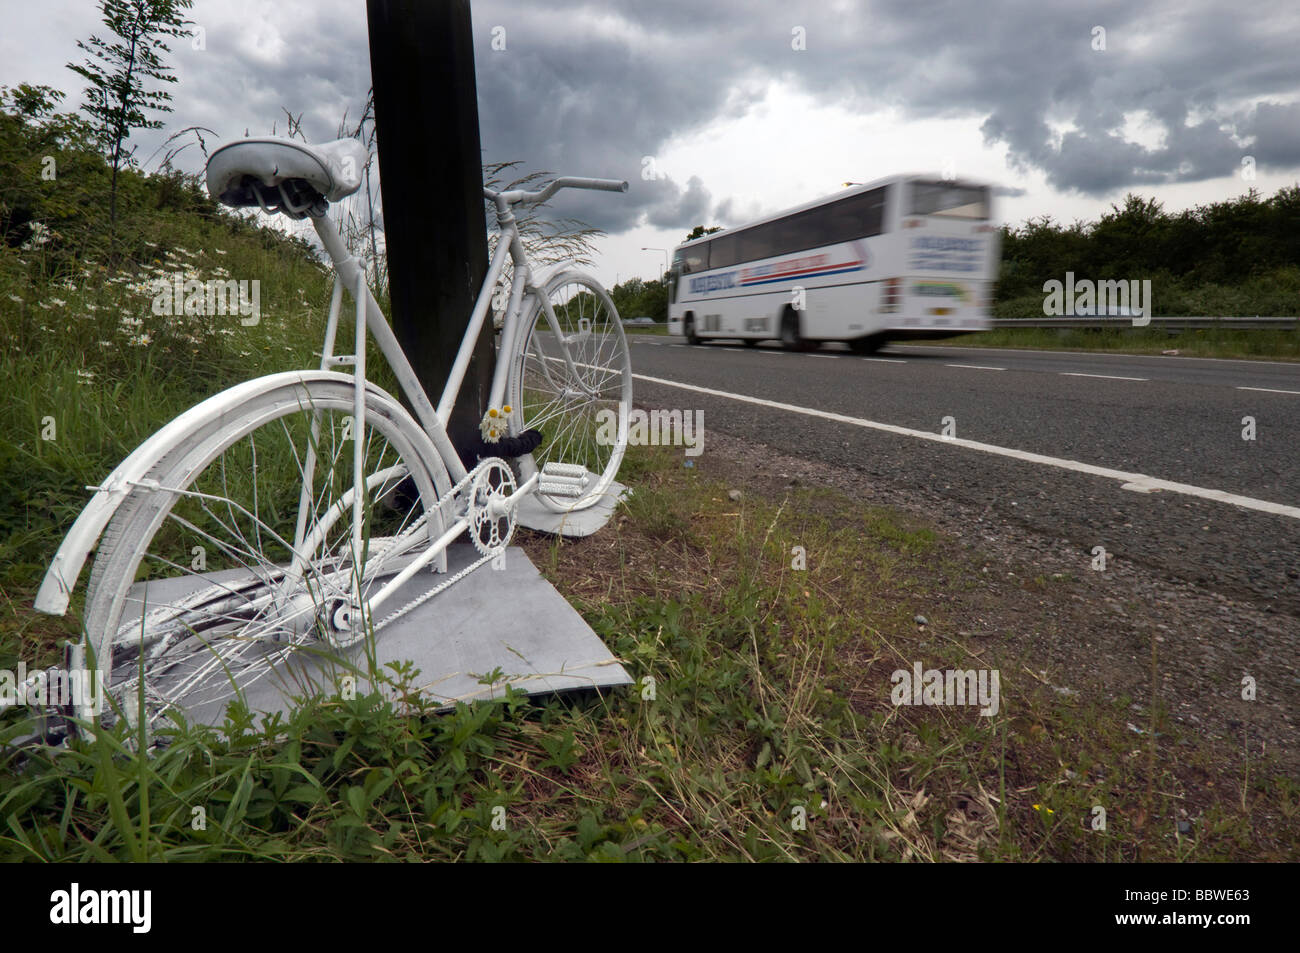 A Ghost Bike - a white painted cycle chained to the spot where a cyclist was killed in a road accident on the A23. Stock Photo